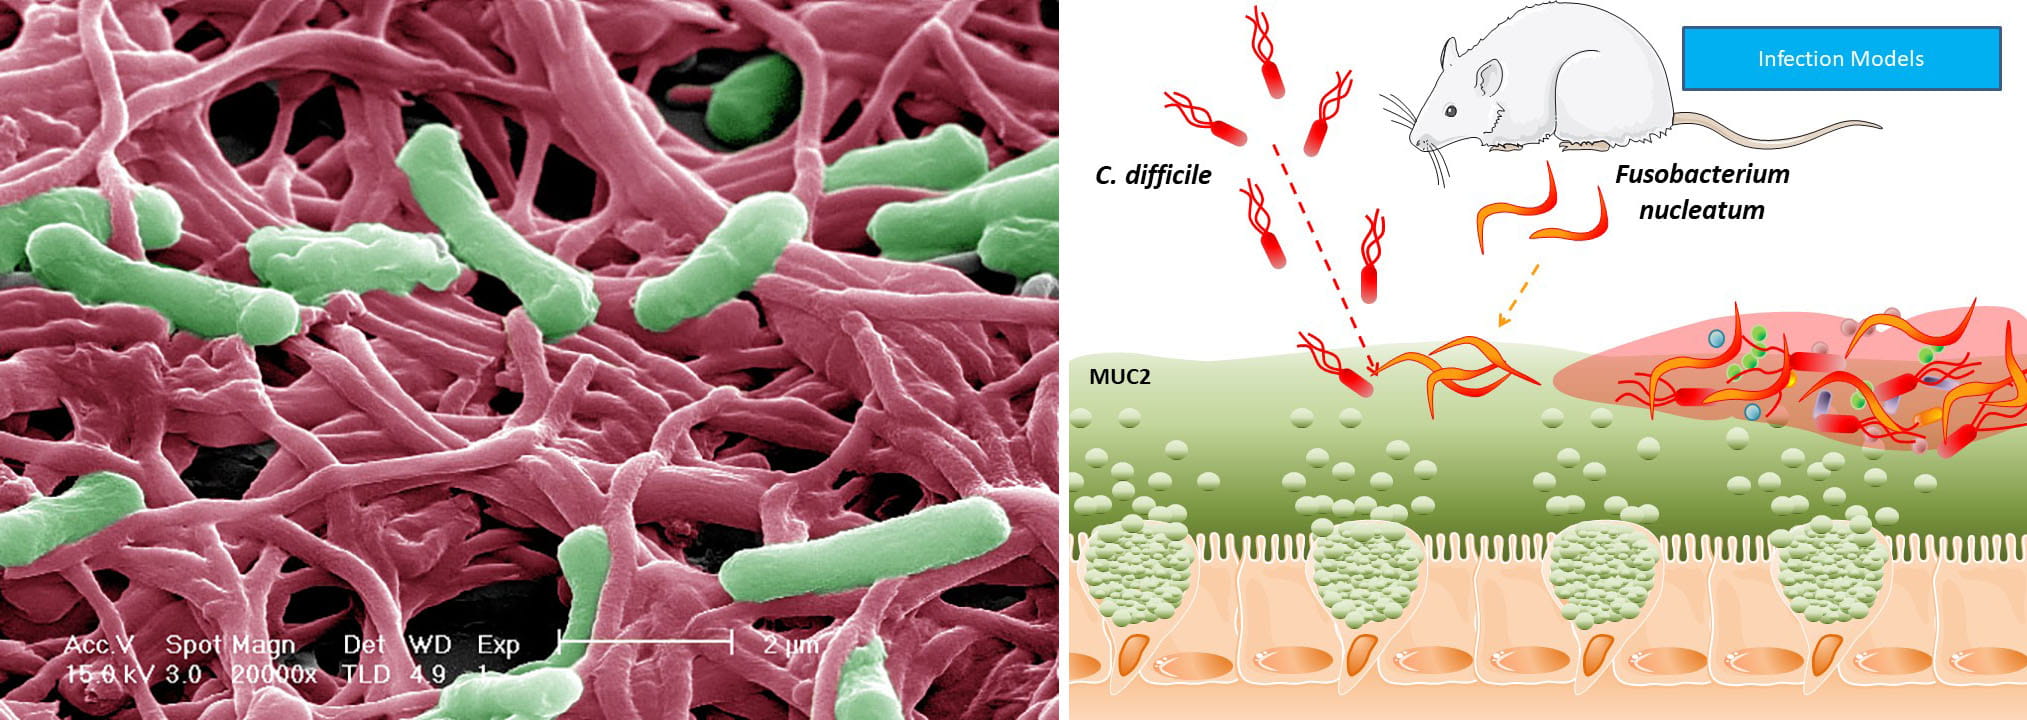 Working model of how pathogens colonize and subvert the mucus layer to cause infection